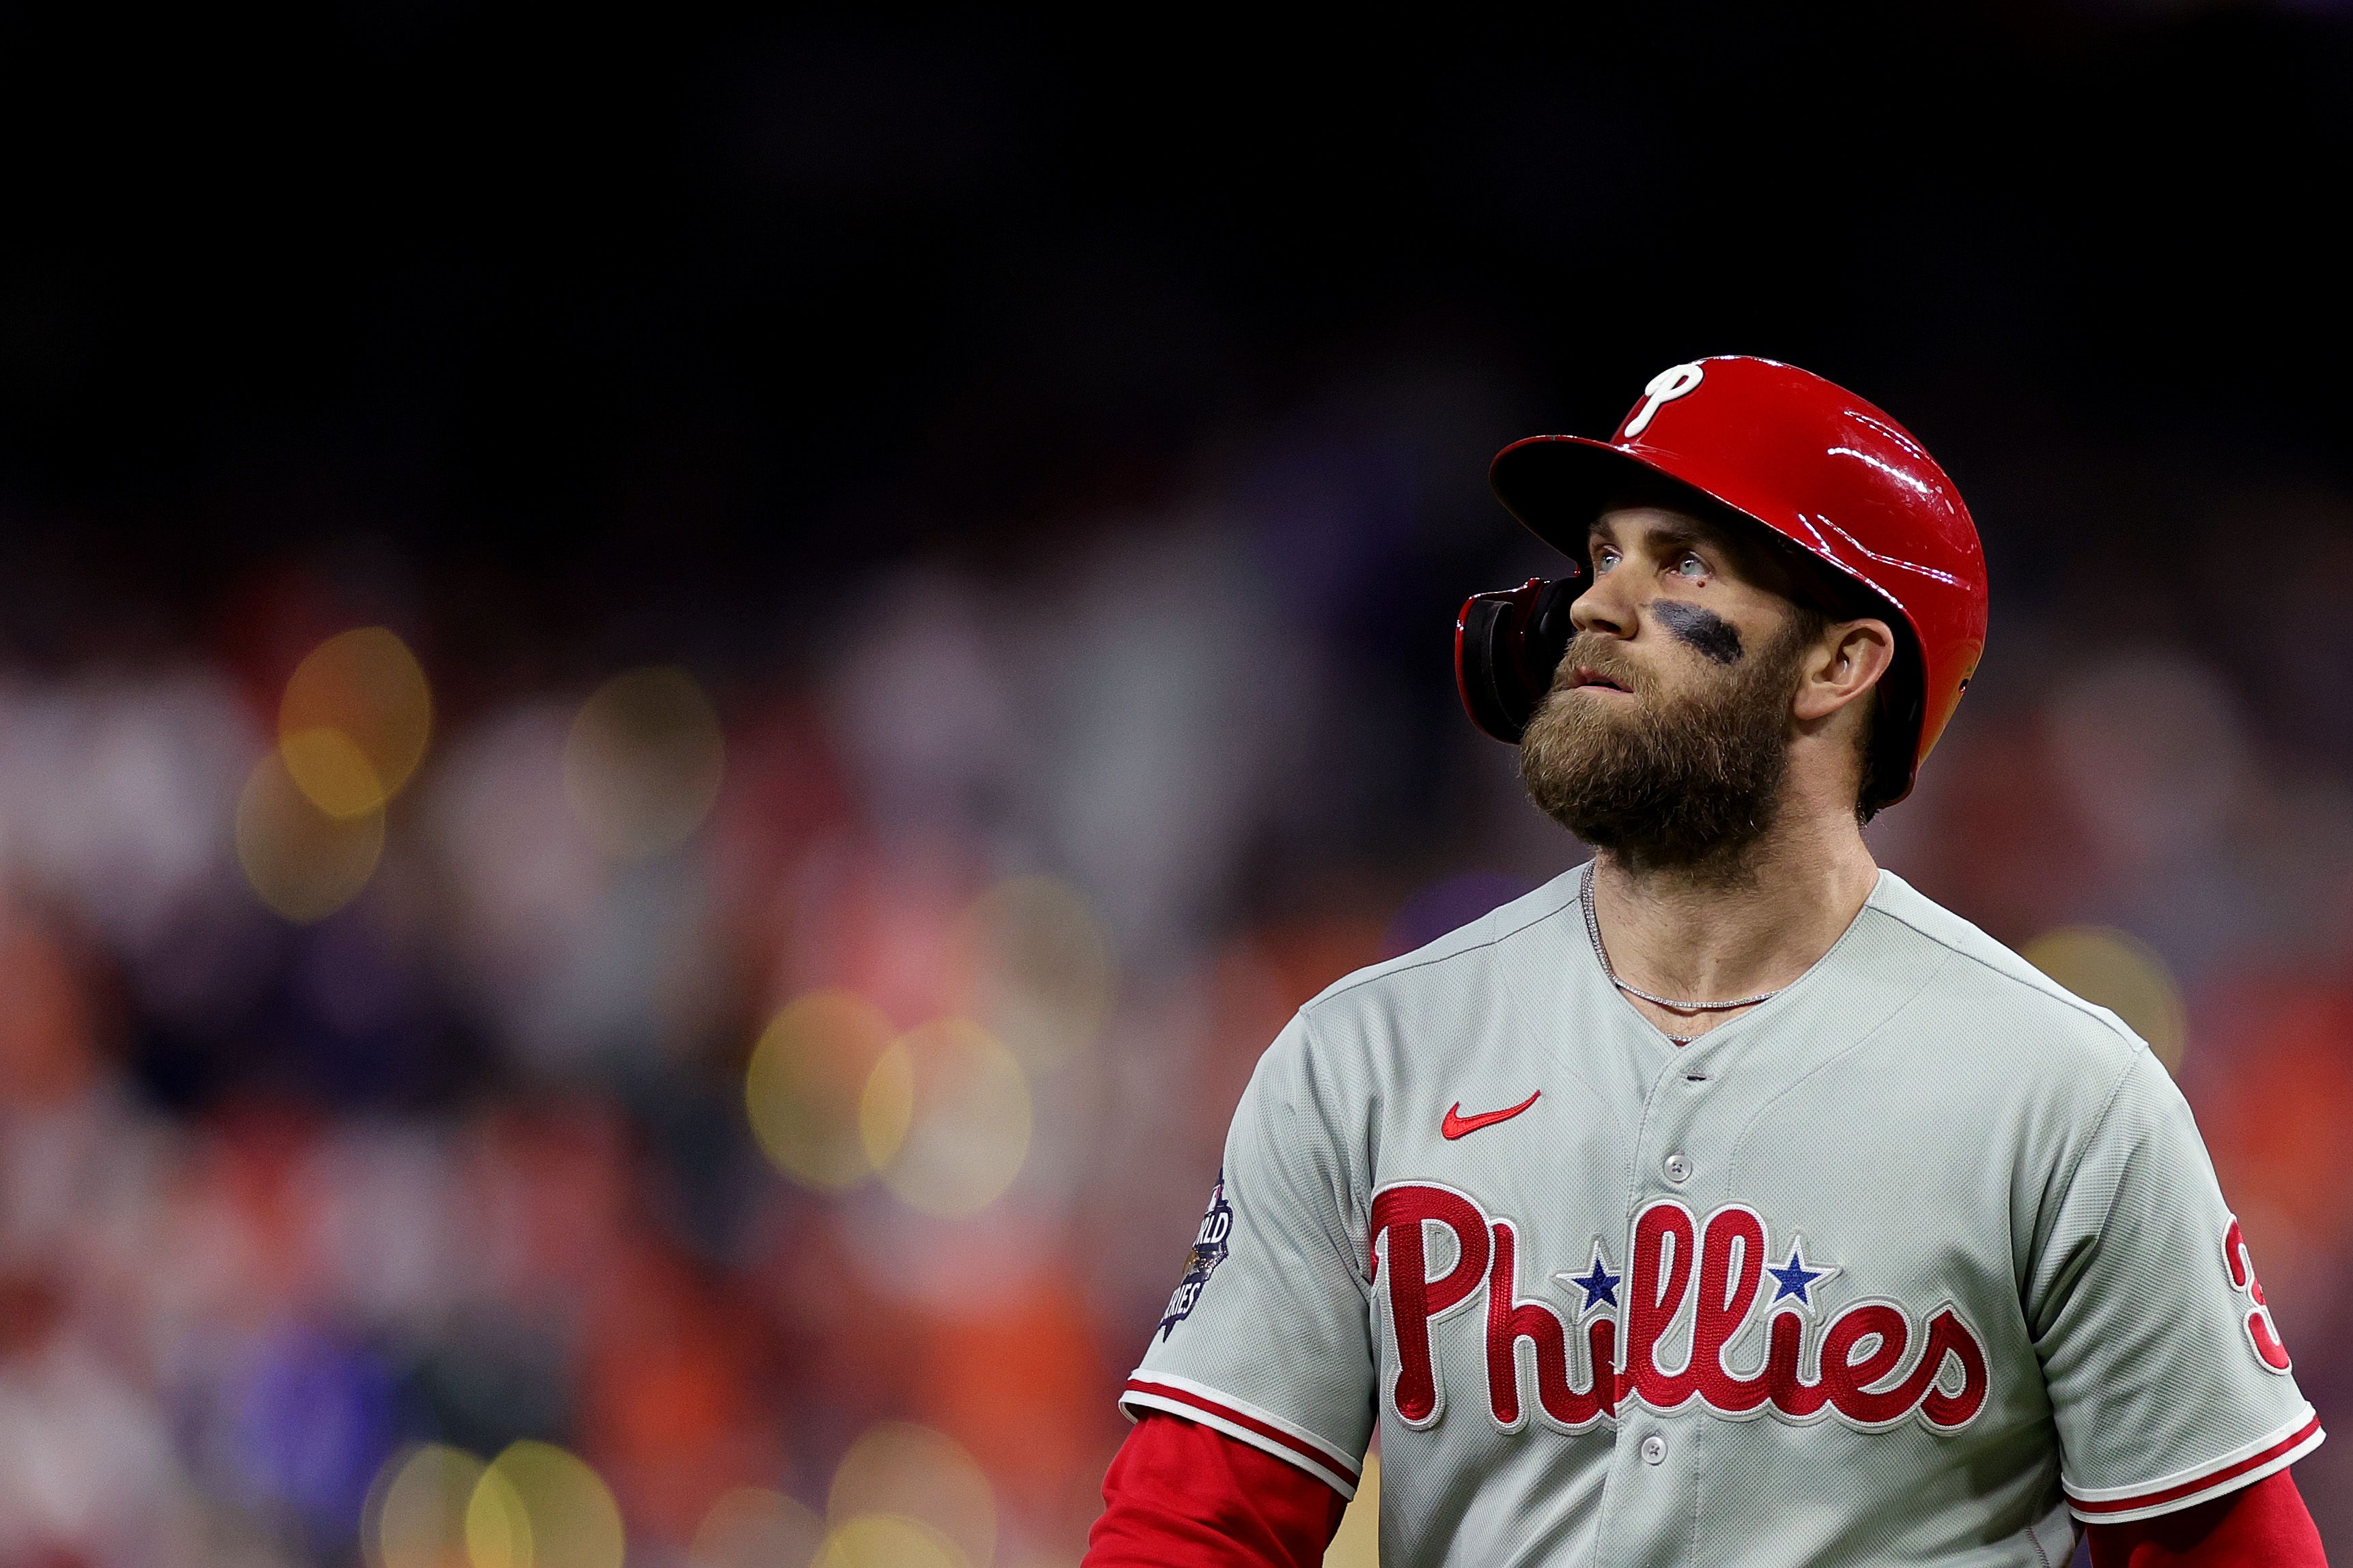 Bryce Harper stares off into the distance in front of a blurred-out crowd.